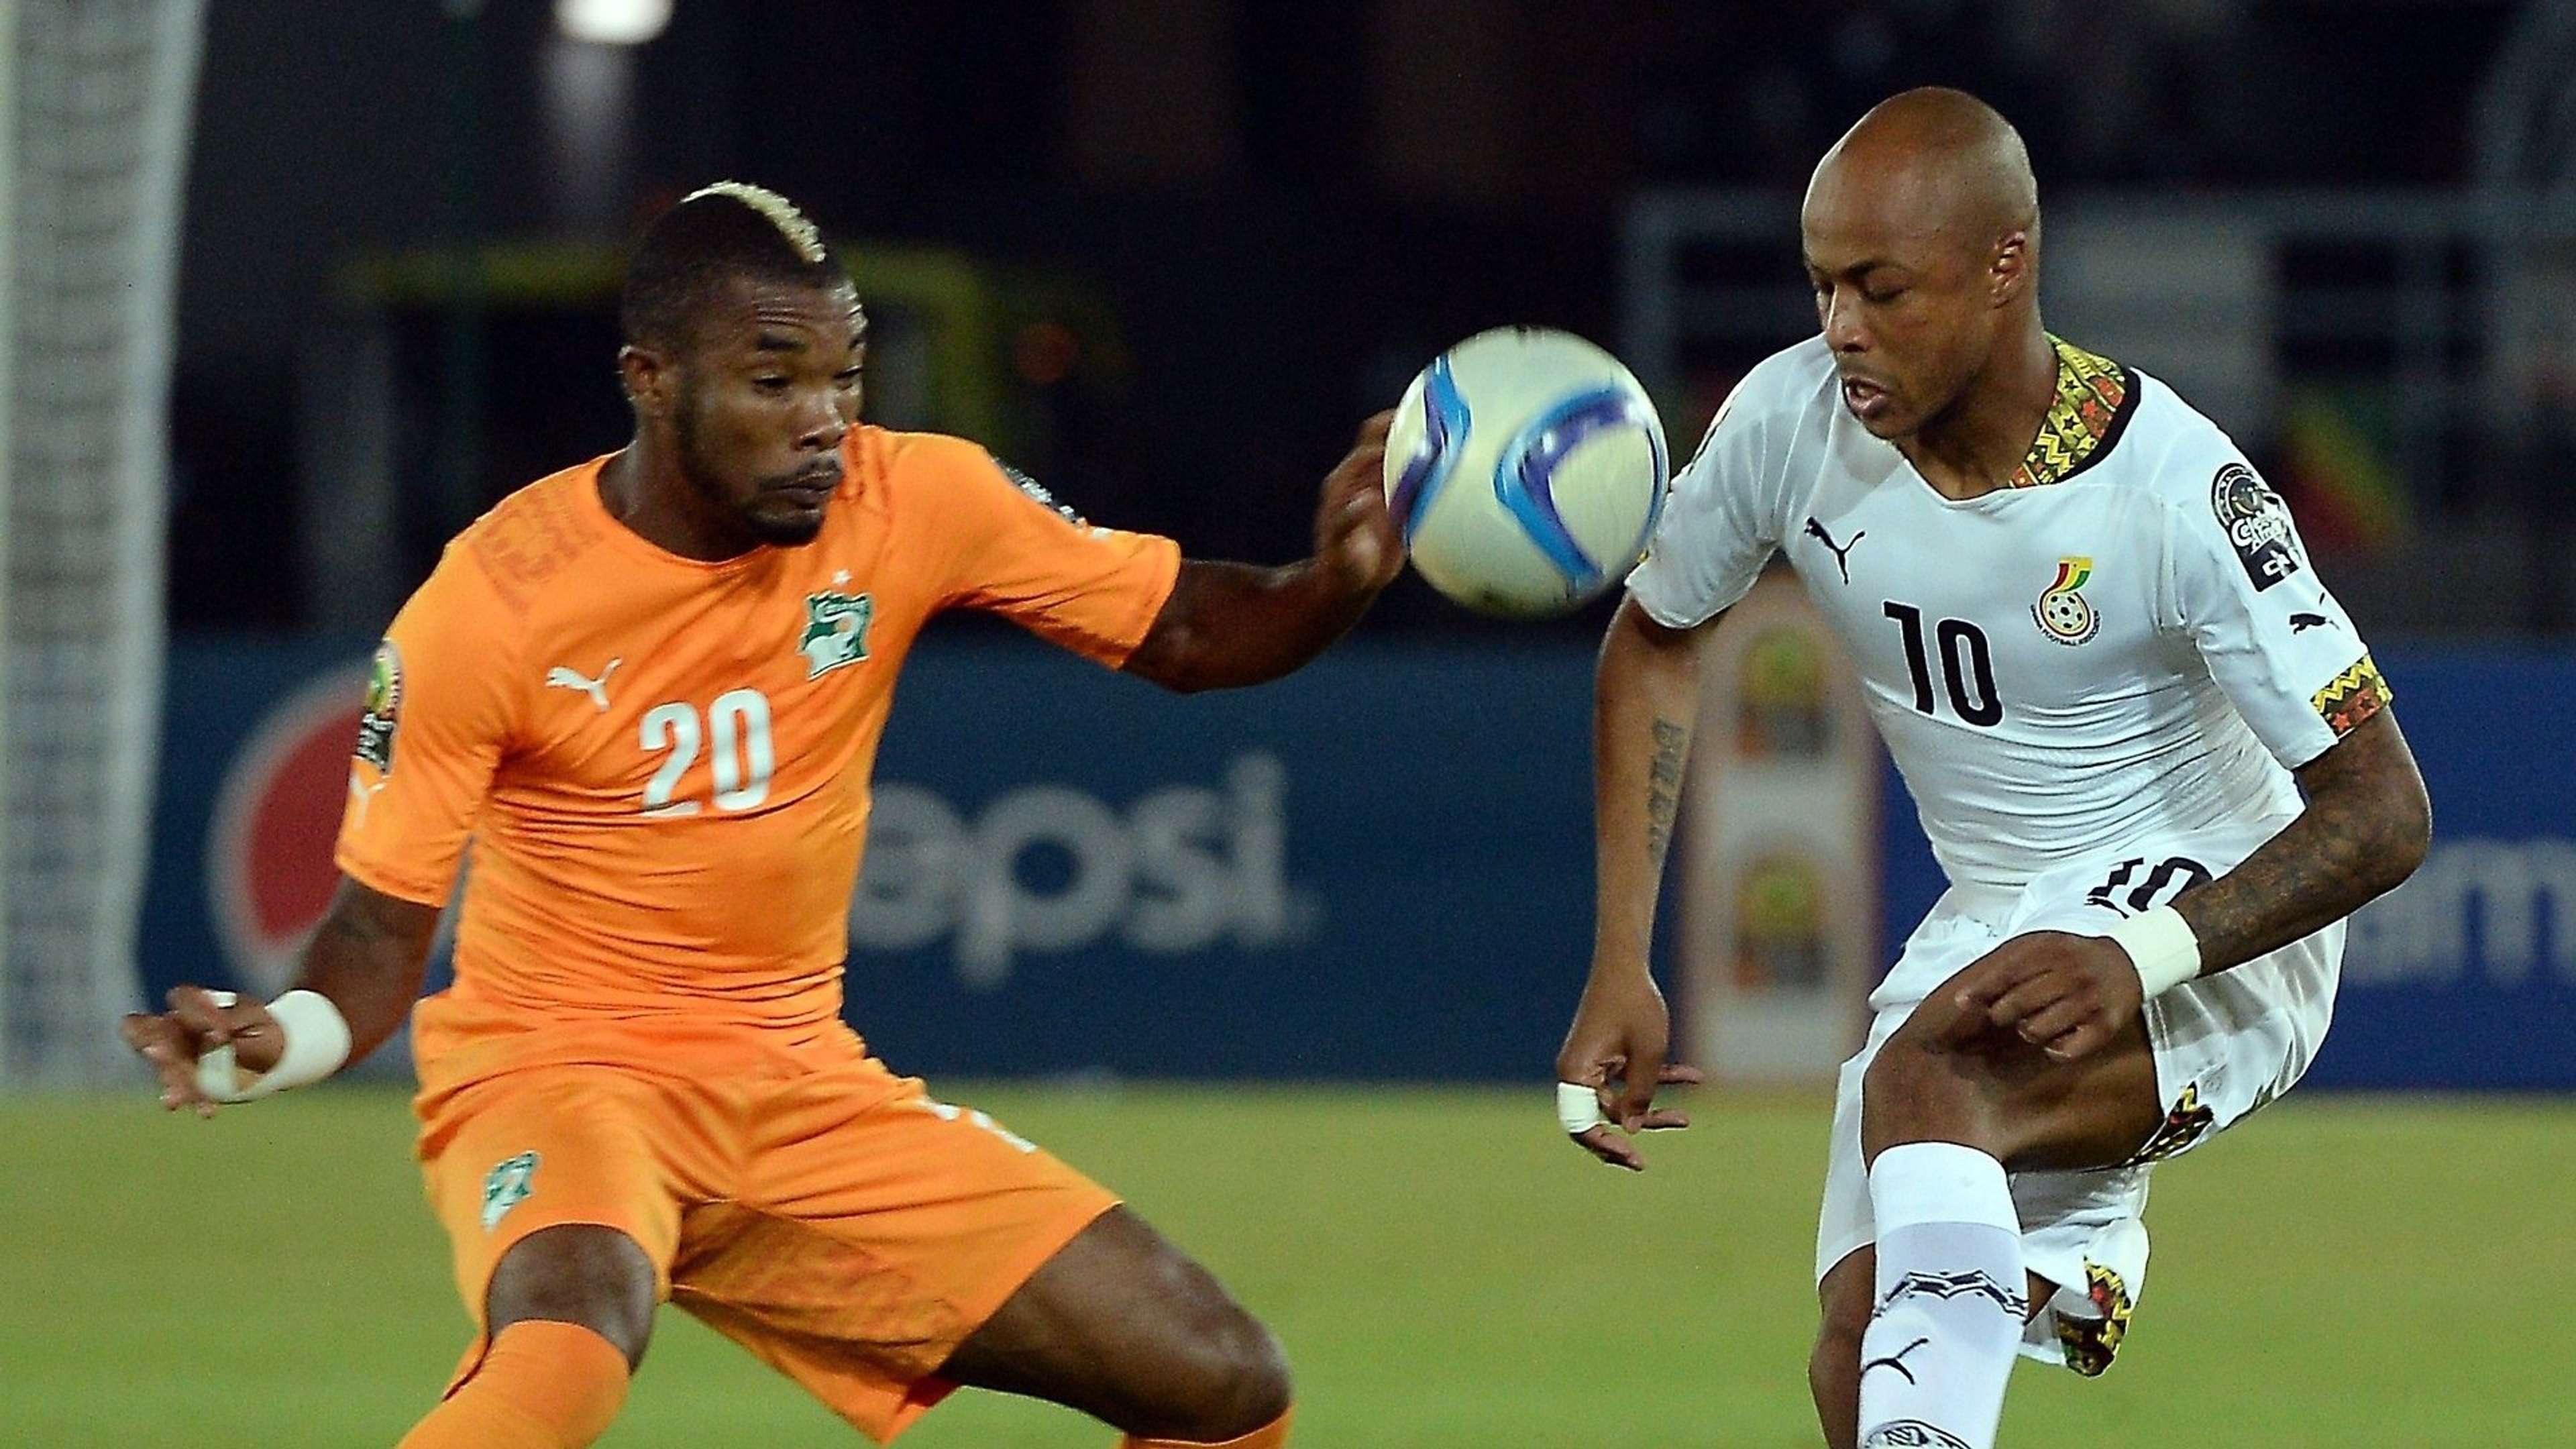 Andre Ayew Serey Die Cote d'Ivoire Ghana Africa Cup of Nations Final 08022015